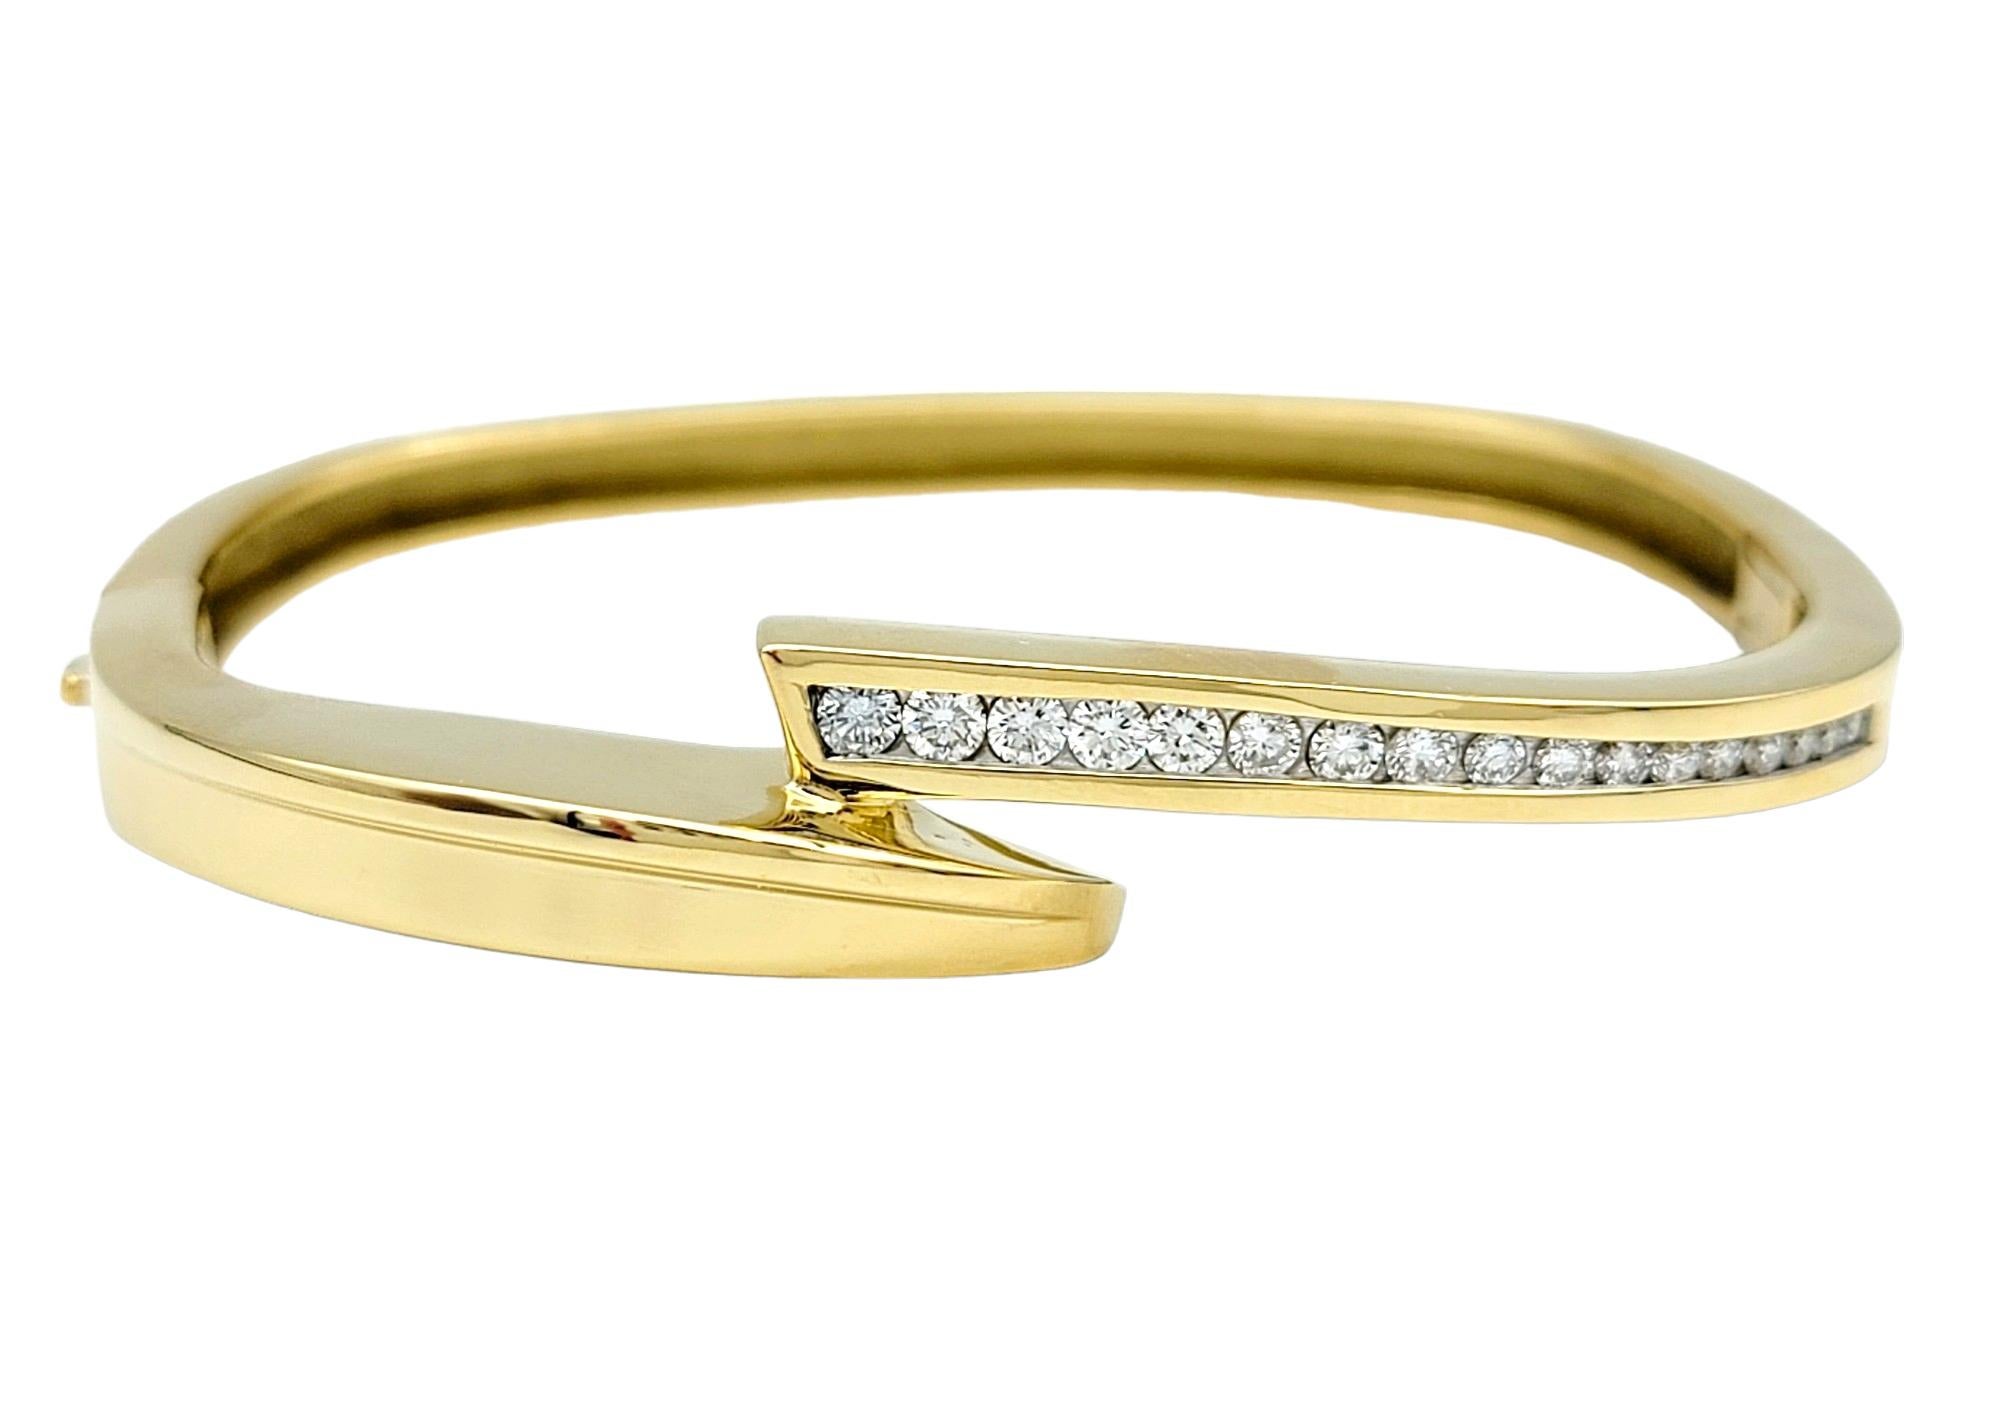 This 18 karat yellow gold bracelet, a creation by the esteemed artisan John Atencio, epitomizes contemporary elegance with its squared bangle and distinctive bypass design. The bypass style, characterized by a crossover or overlapping motif, imparts